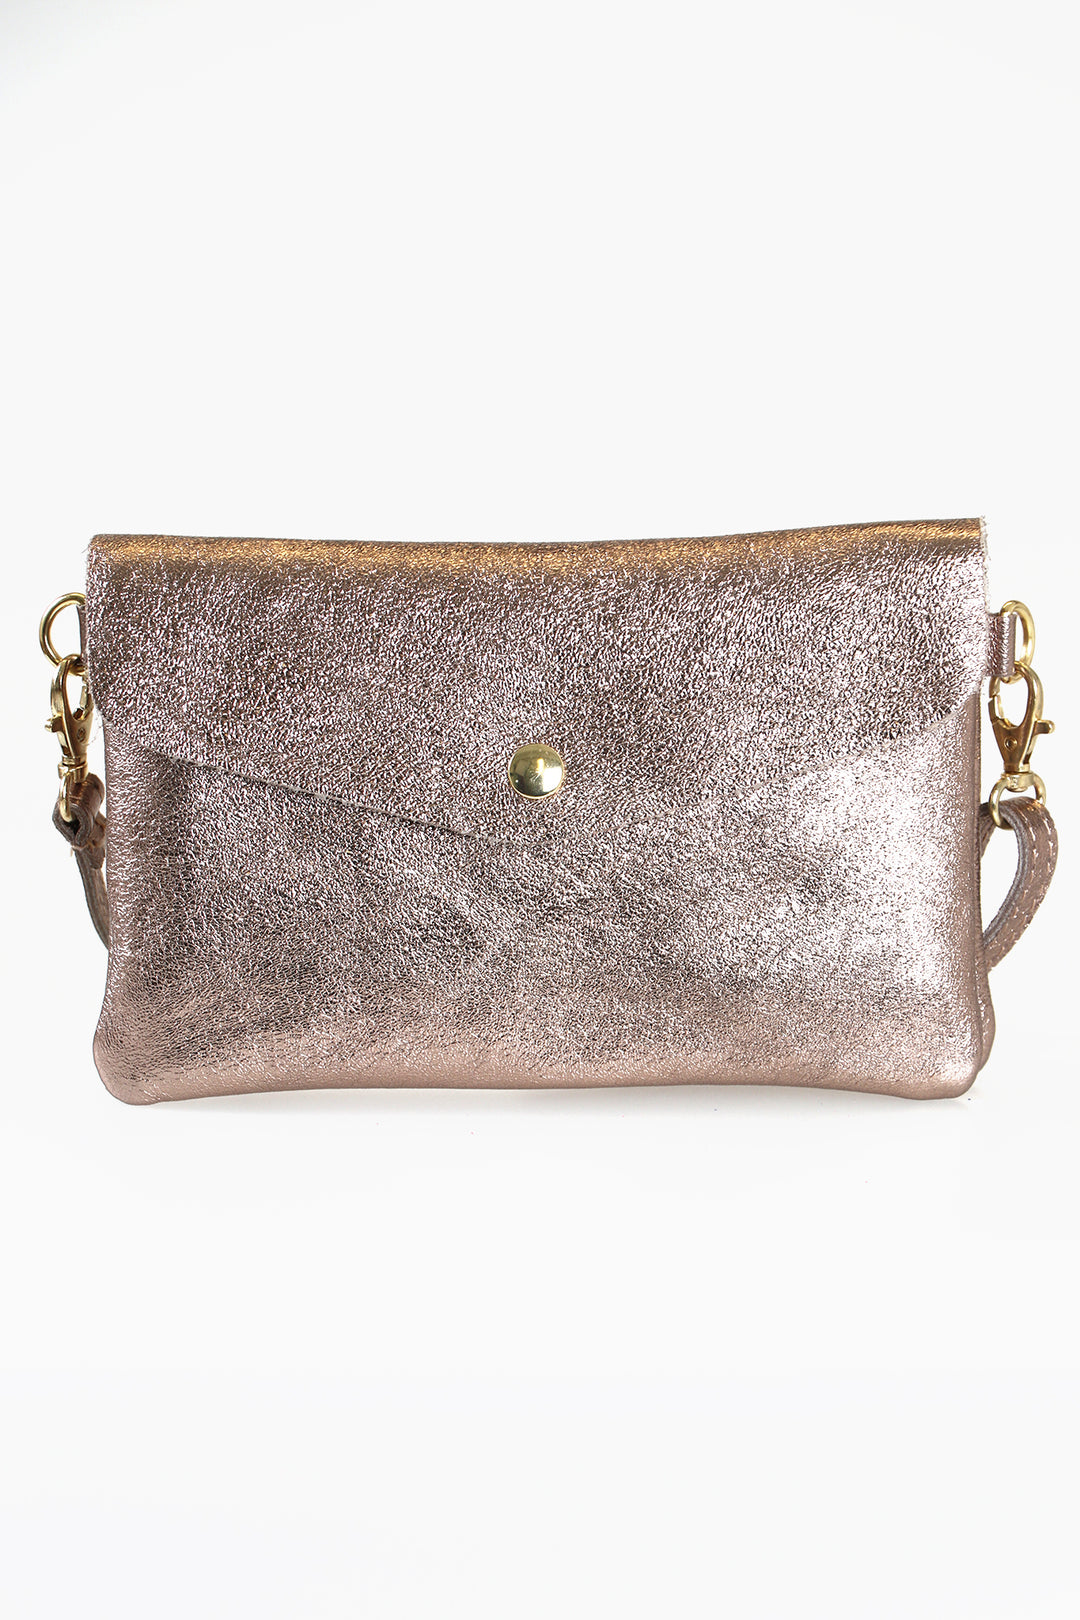 Champagne Large Genuine Italian Leather Envelope Clutch